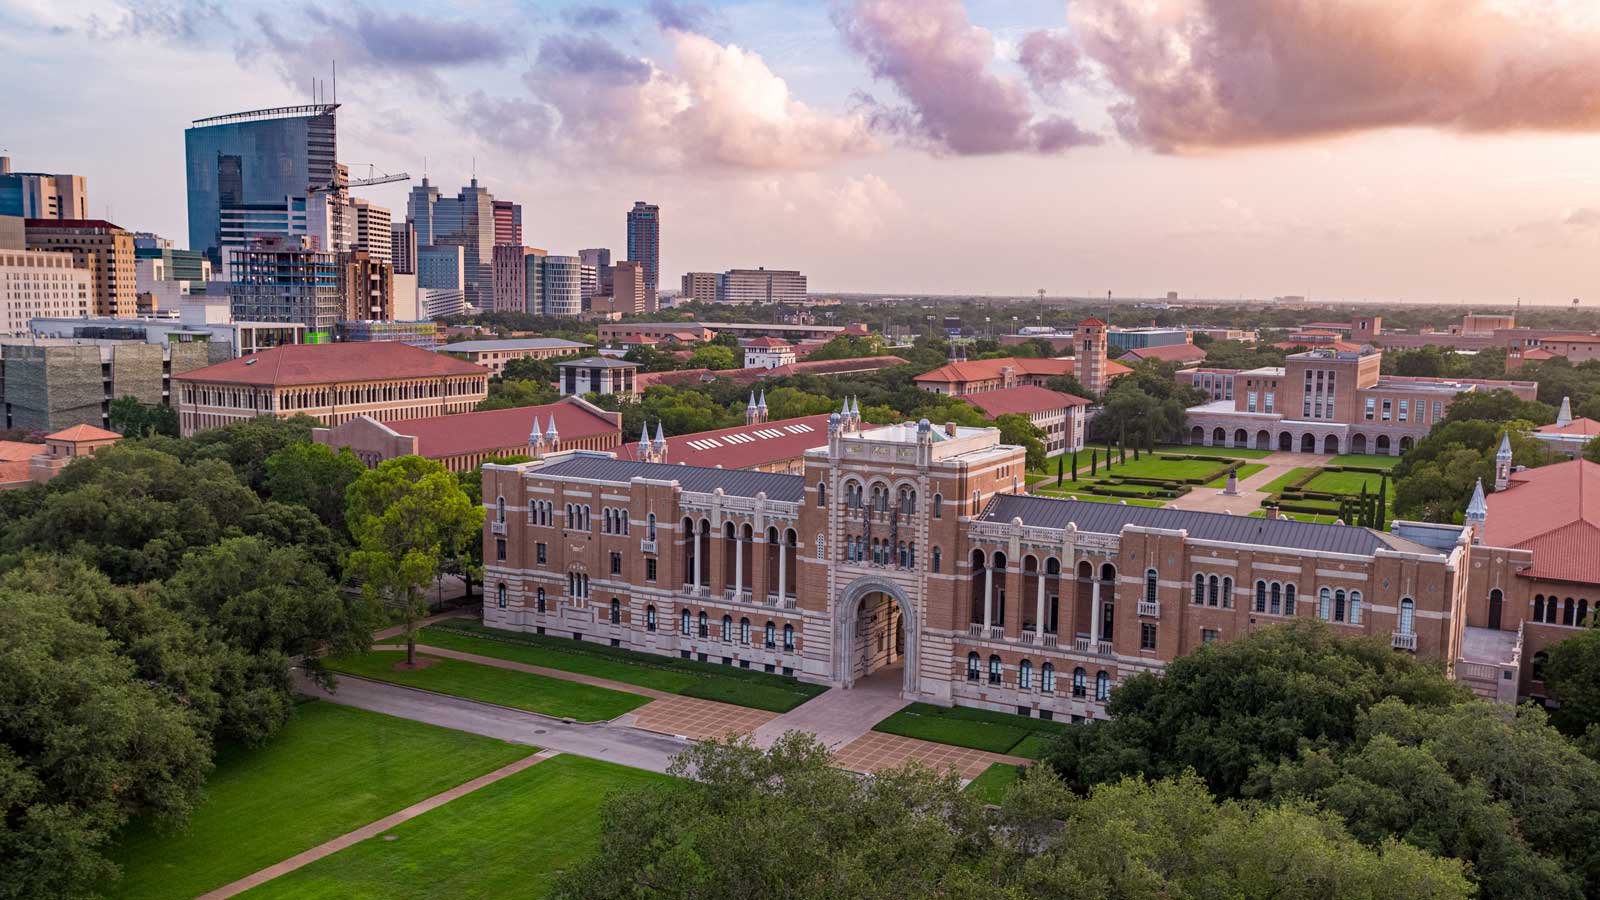 Lovett Hall with Texas Medical Center in background